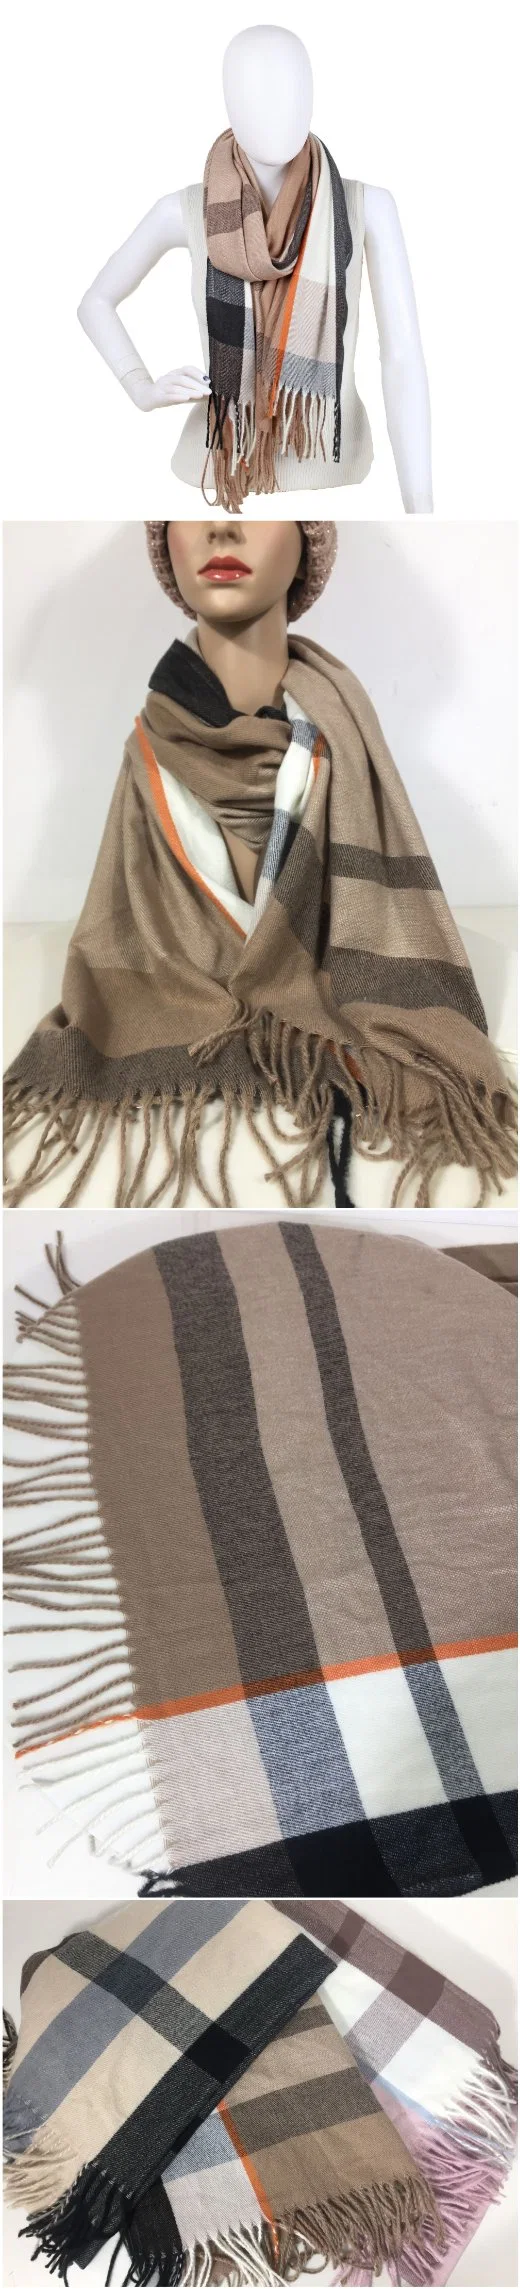 2023 New Unisex Women Men Winter Lovers Sweethearts Couples Fashion Soft Smooth Confortable Touch Scarves Woven Checks Scarf with Tassel